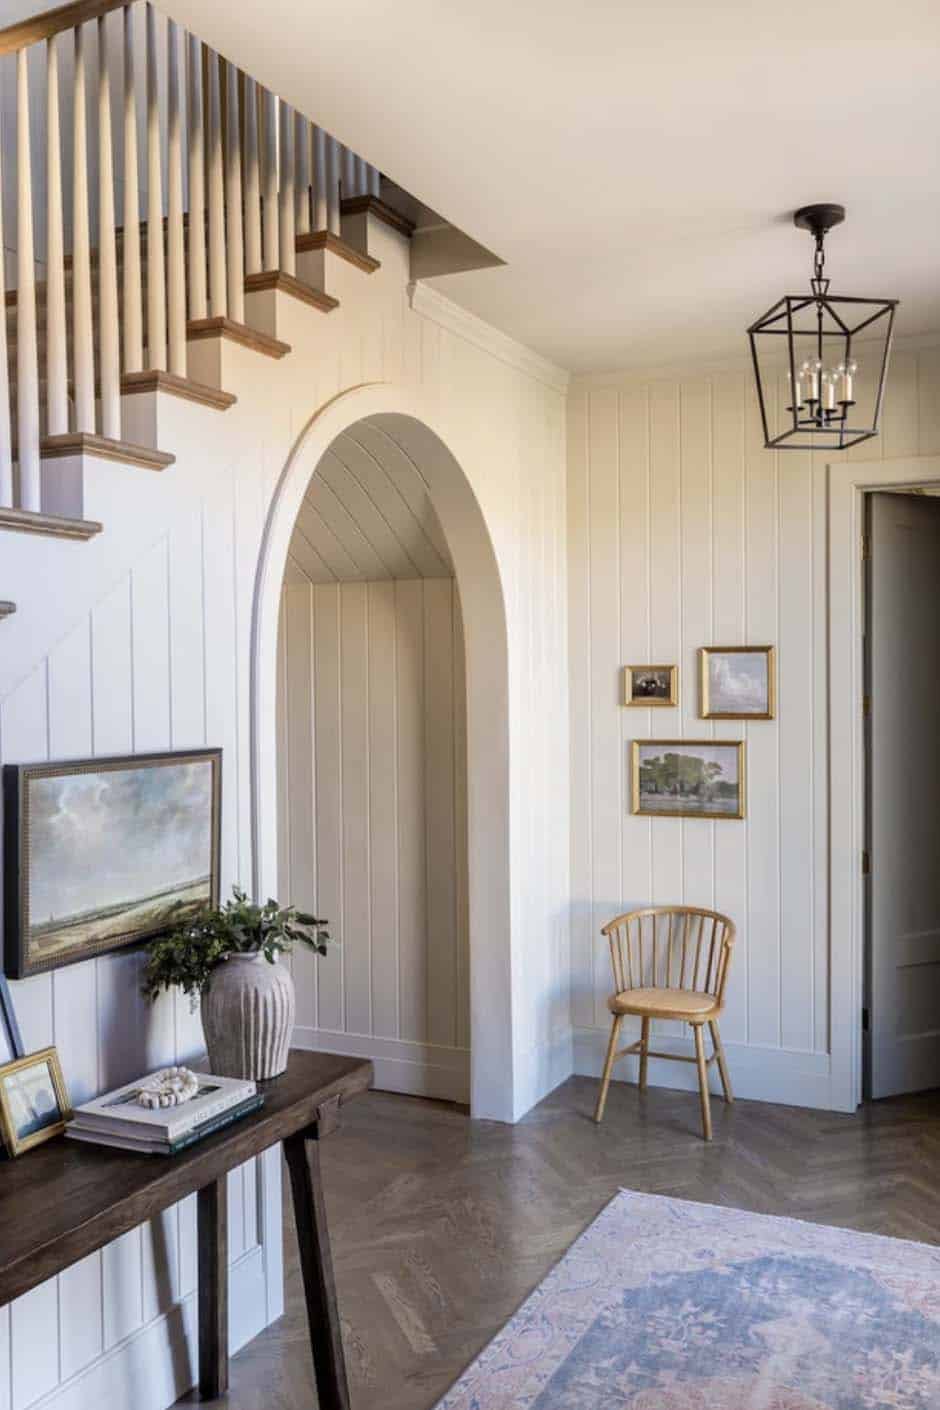 transitional hallway with an arched passageway leading into the main living spaces